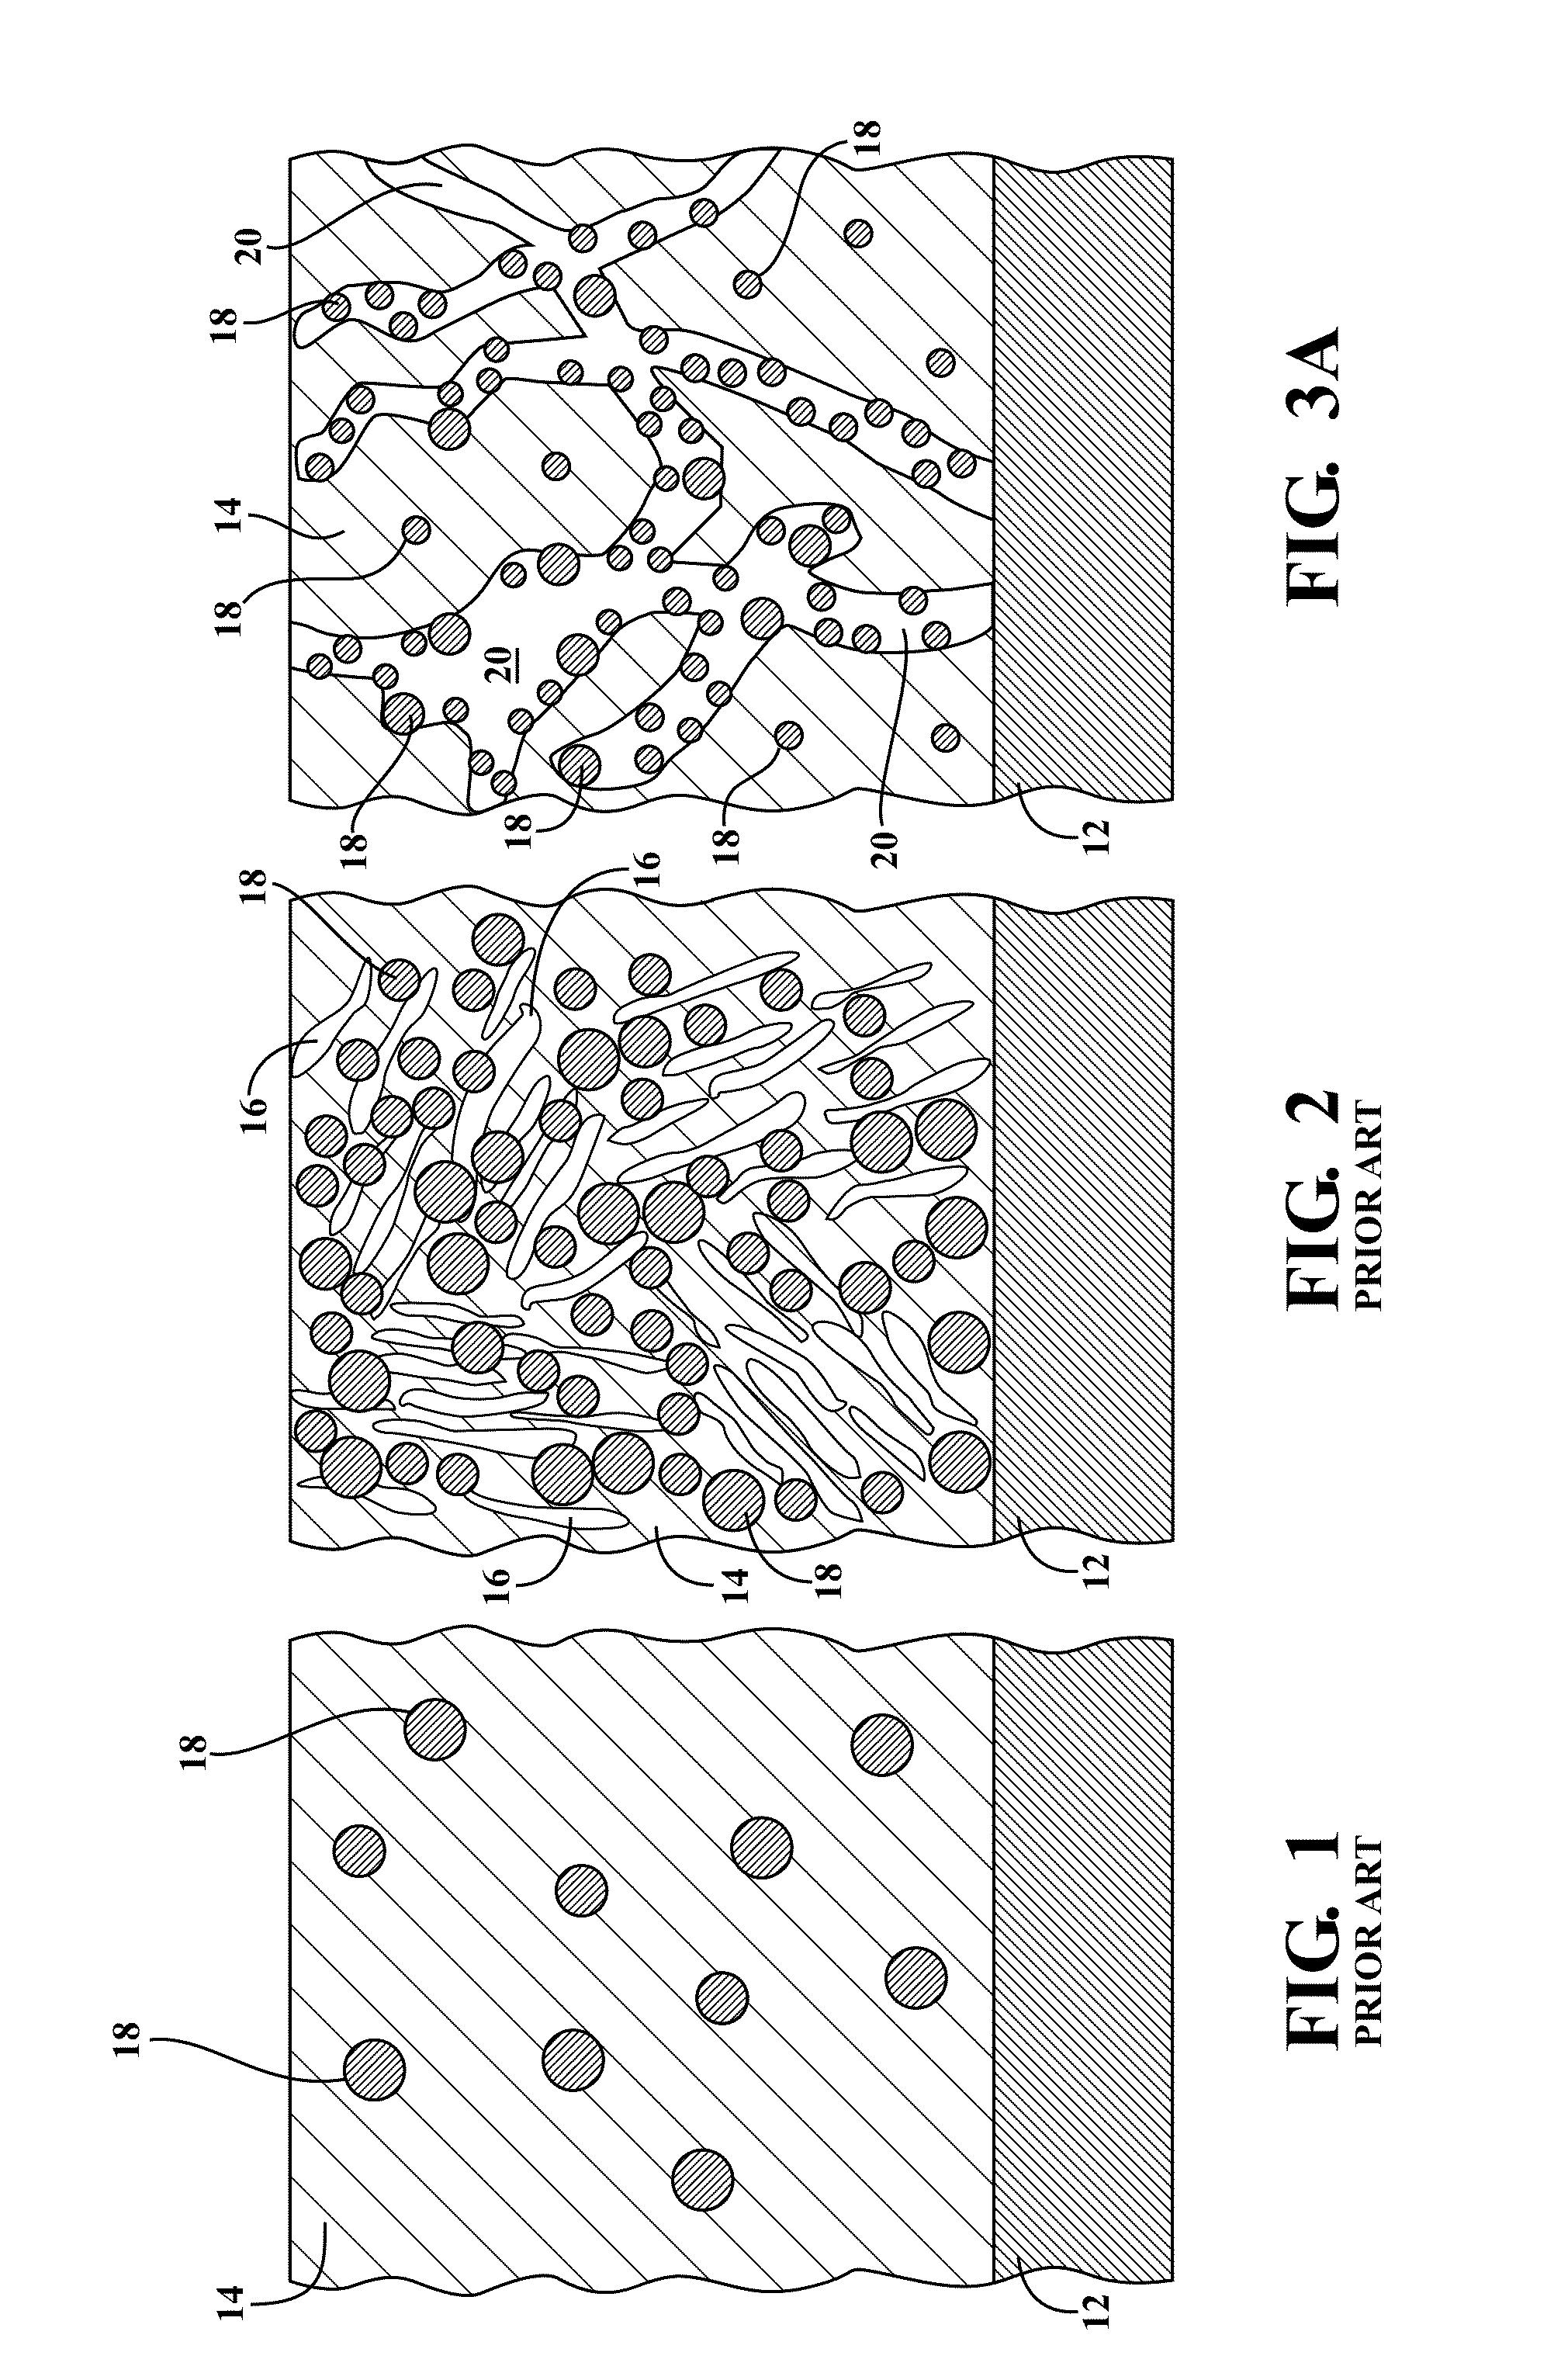 Metal hydride alloy with catalytic channels